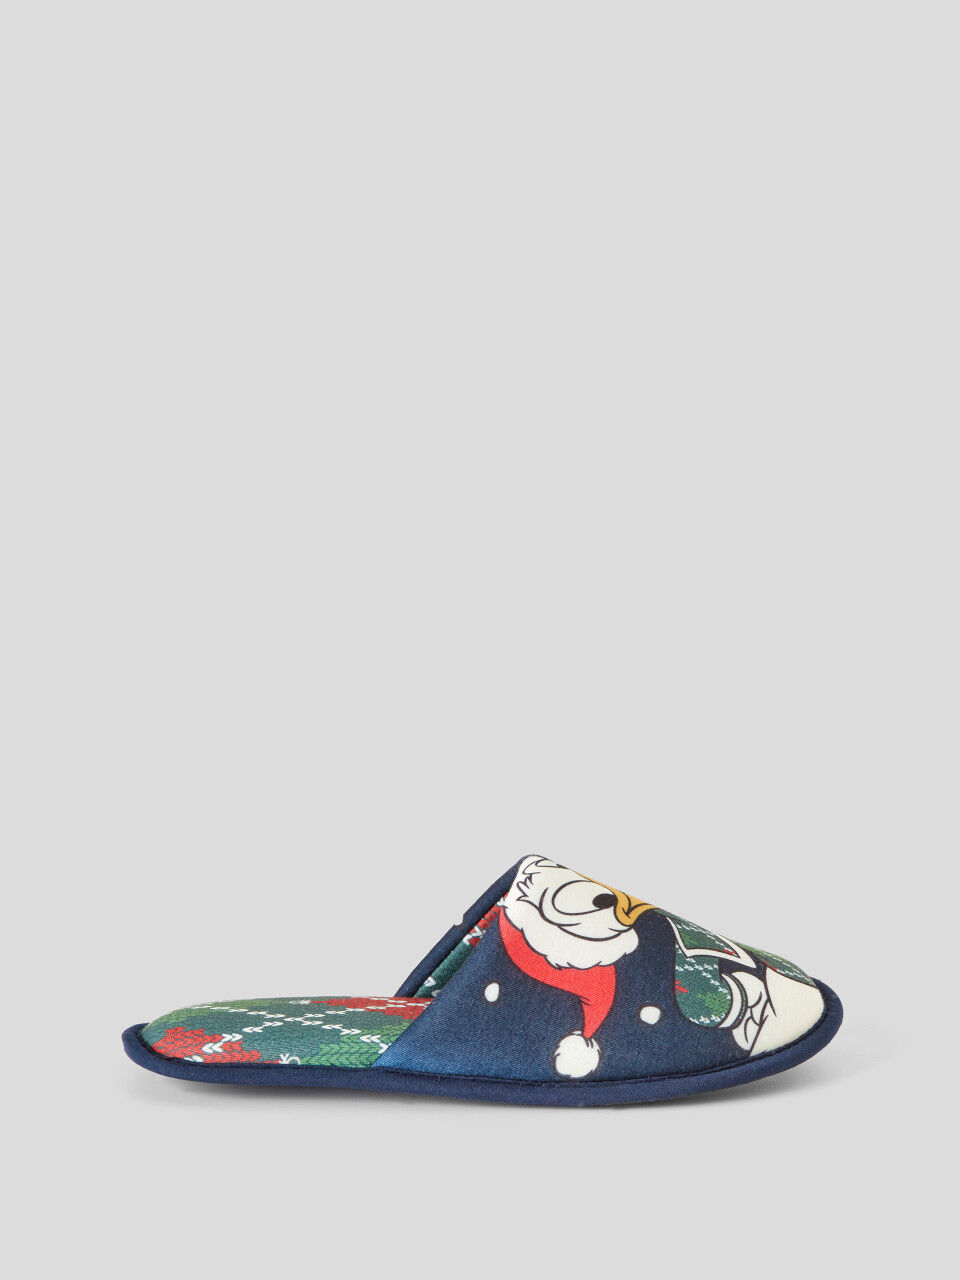 Donald Duck Christmas slippers